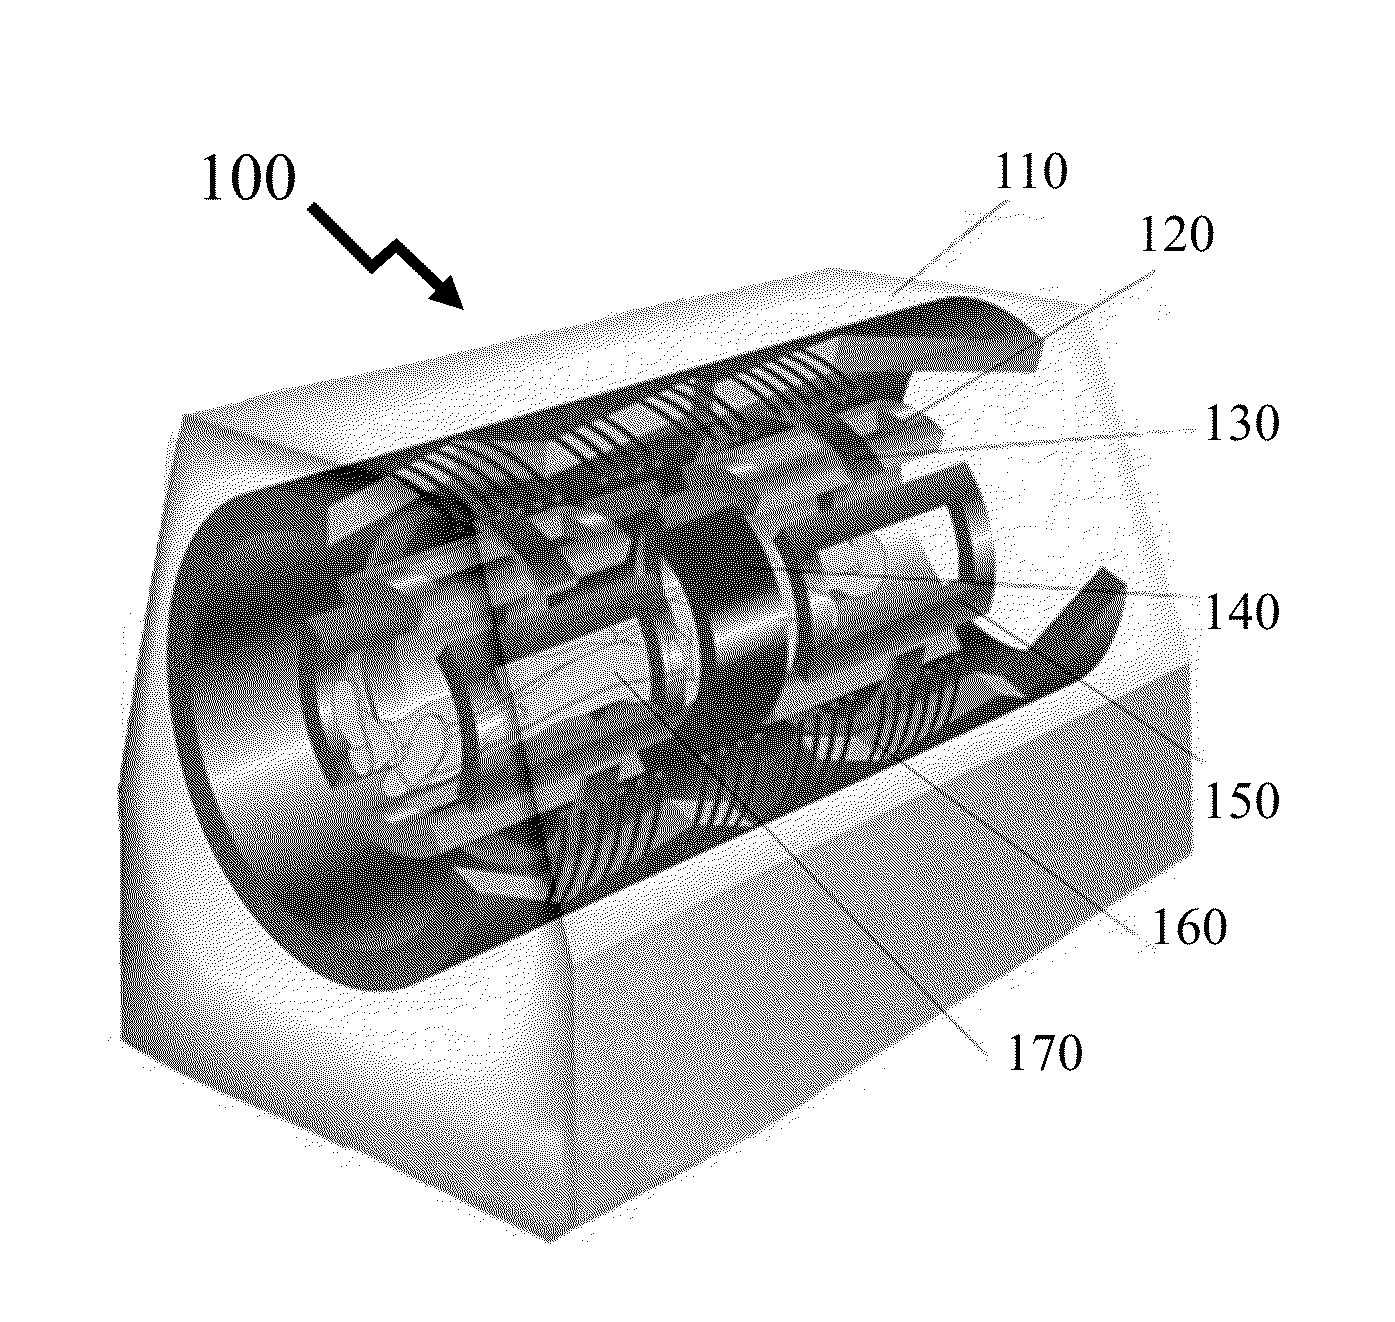 Methods and systems relating to high resolution magnetic resonance imaging